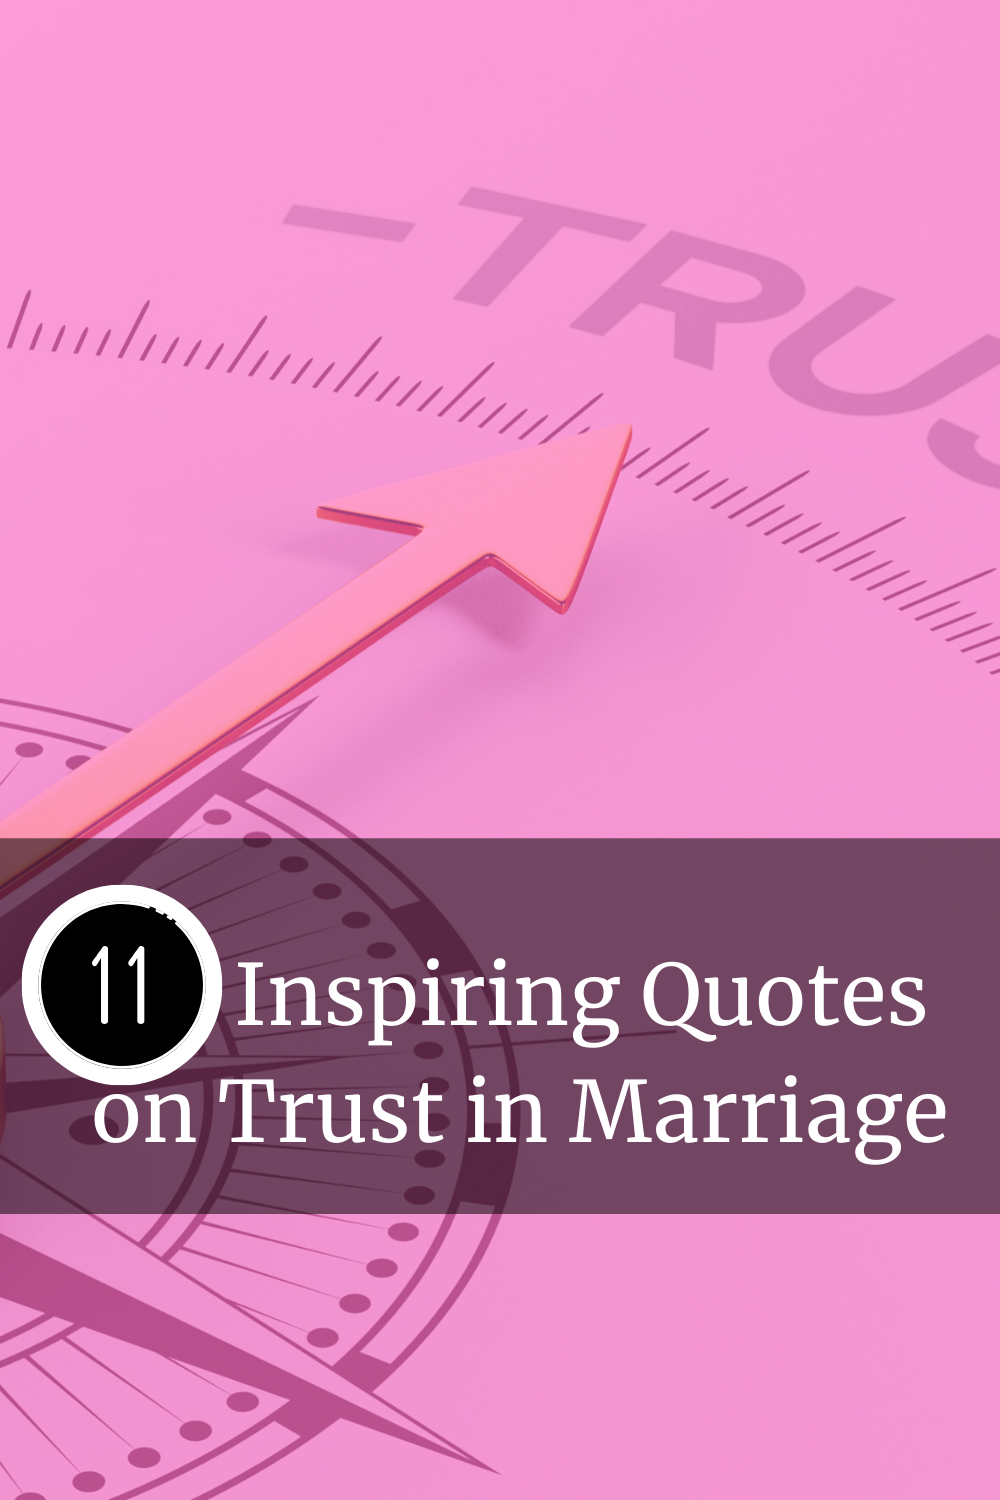 11+inspiring+quotes+on+trust+in+marriage+1